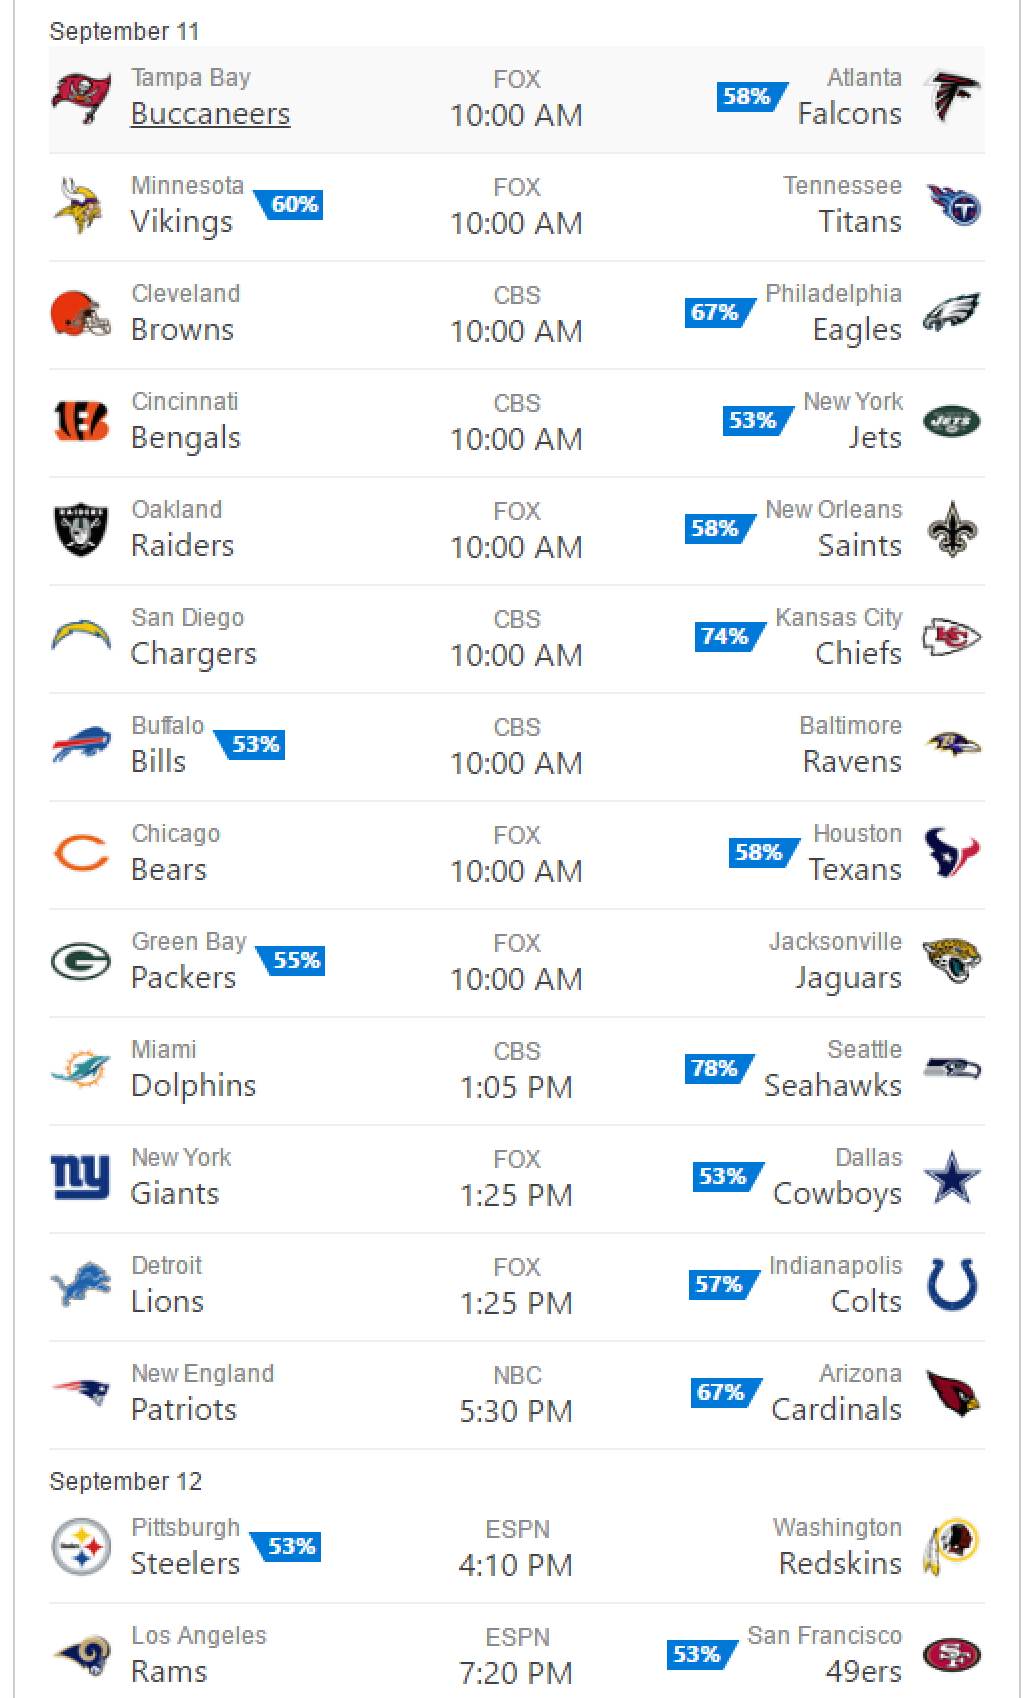 Bing's NFL predictions for Week 1 include several upsets, and one it